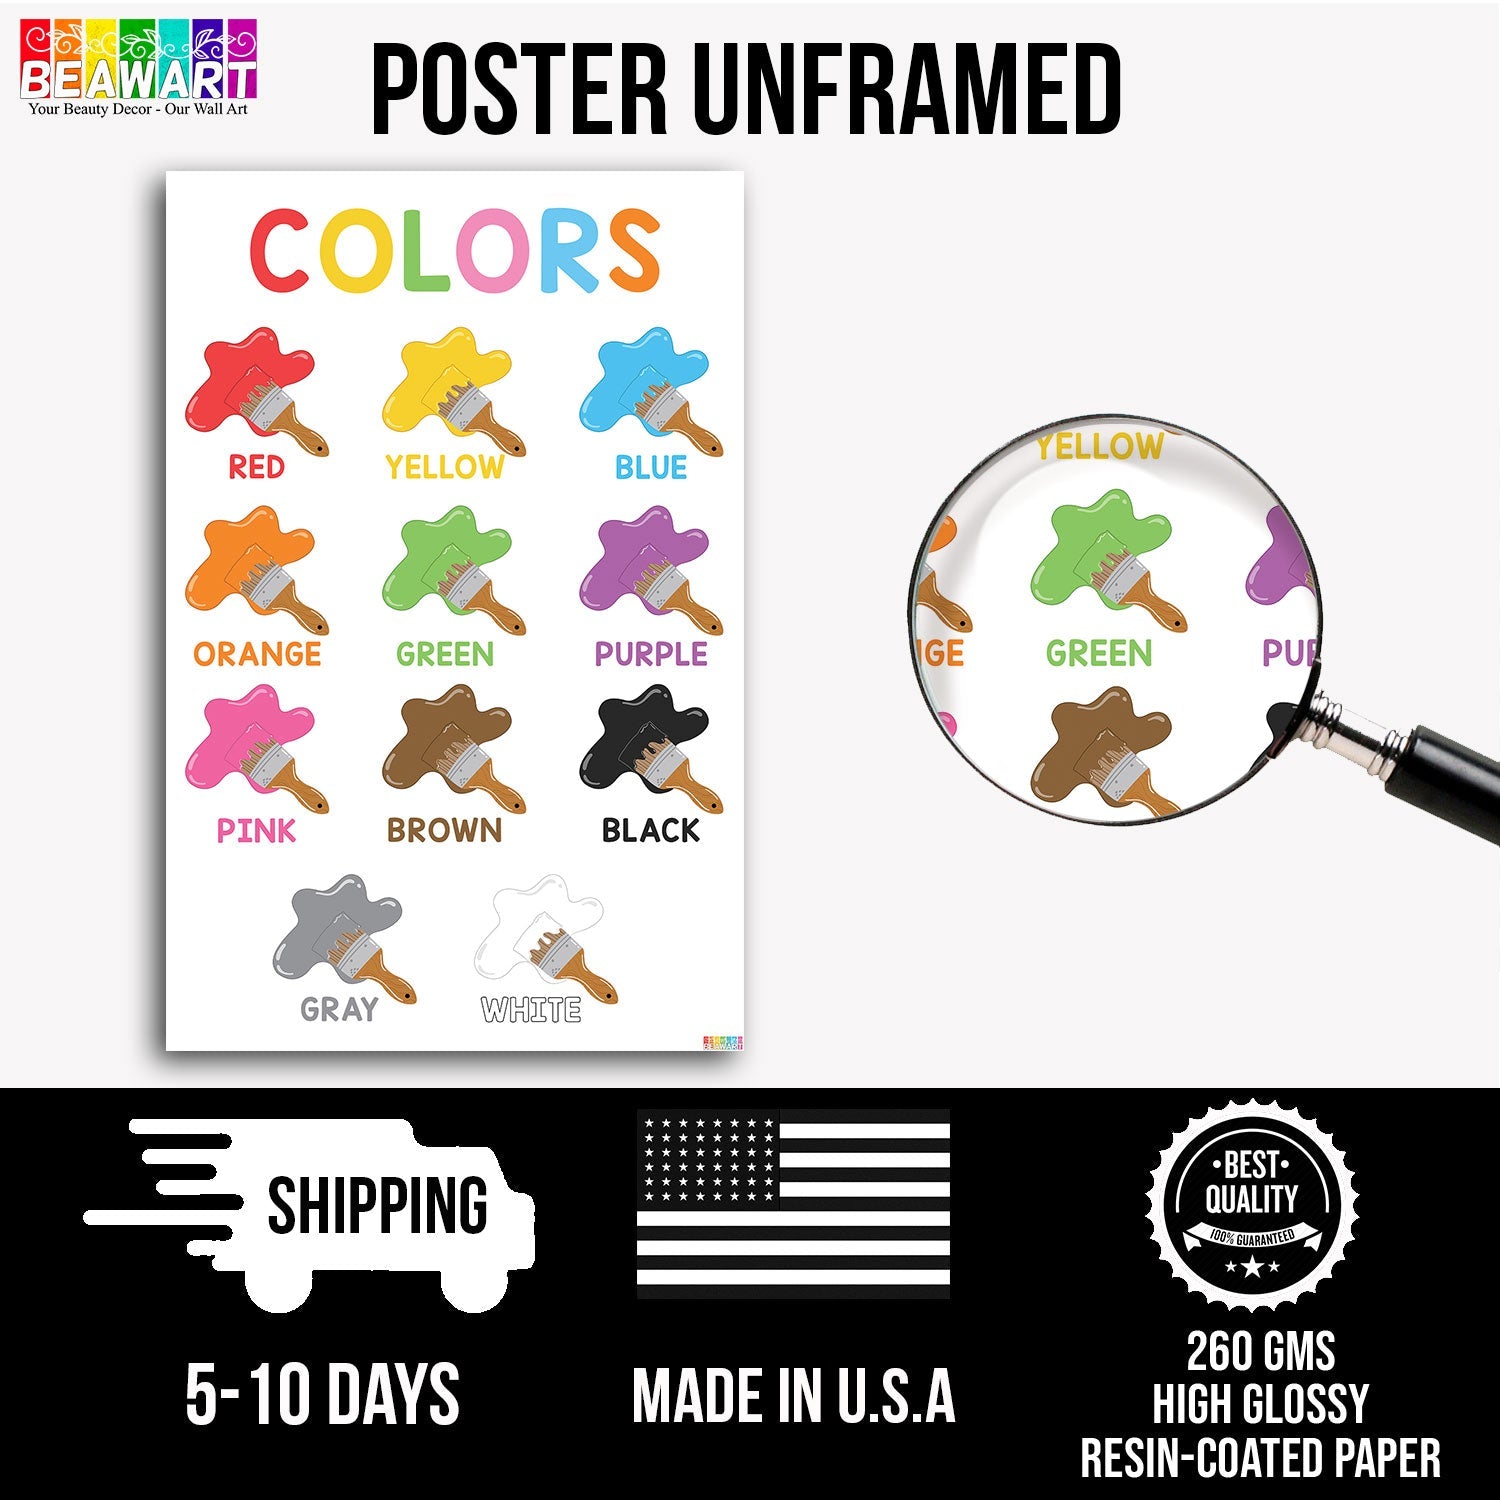 Vibrant Colors Chart Poster Laminated For Preschoolers/Kids, Educational Posters For Toddlers, Learning Posters For Toddlers 1-3, Preschool Homeschool Posters For Kindergarten Classroom Wall Decor - BEAWART